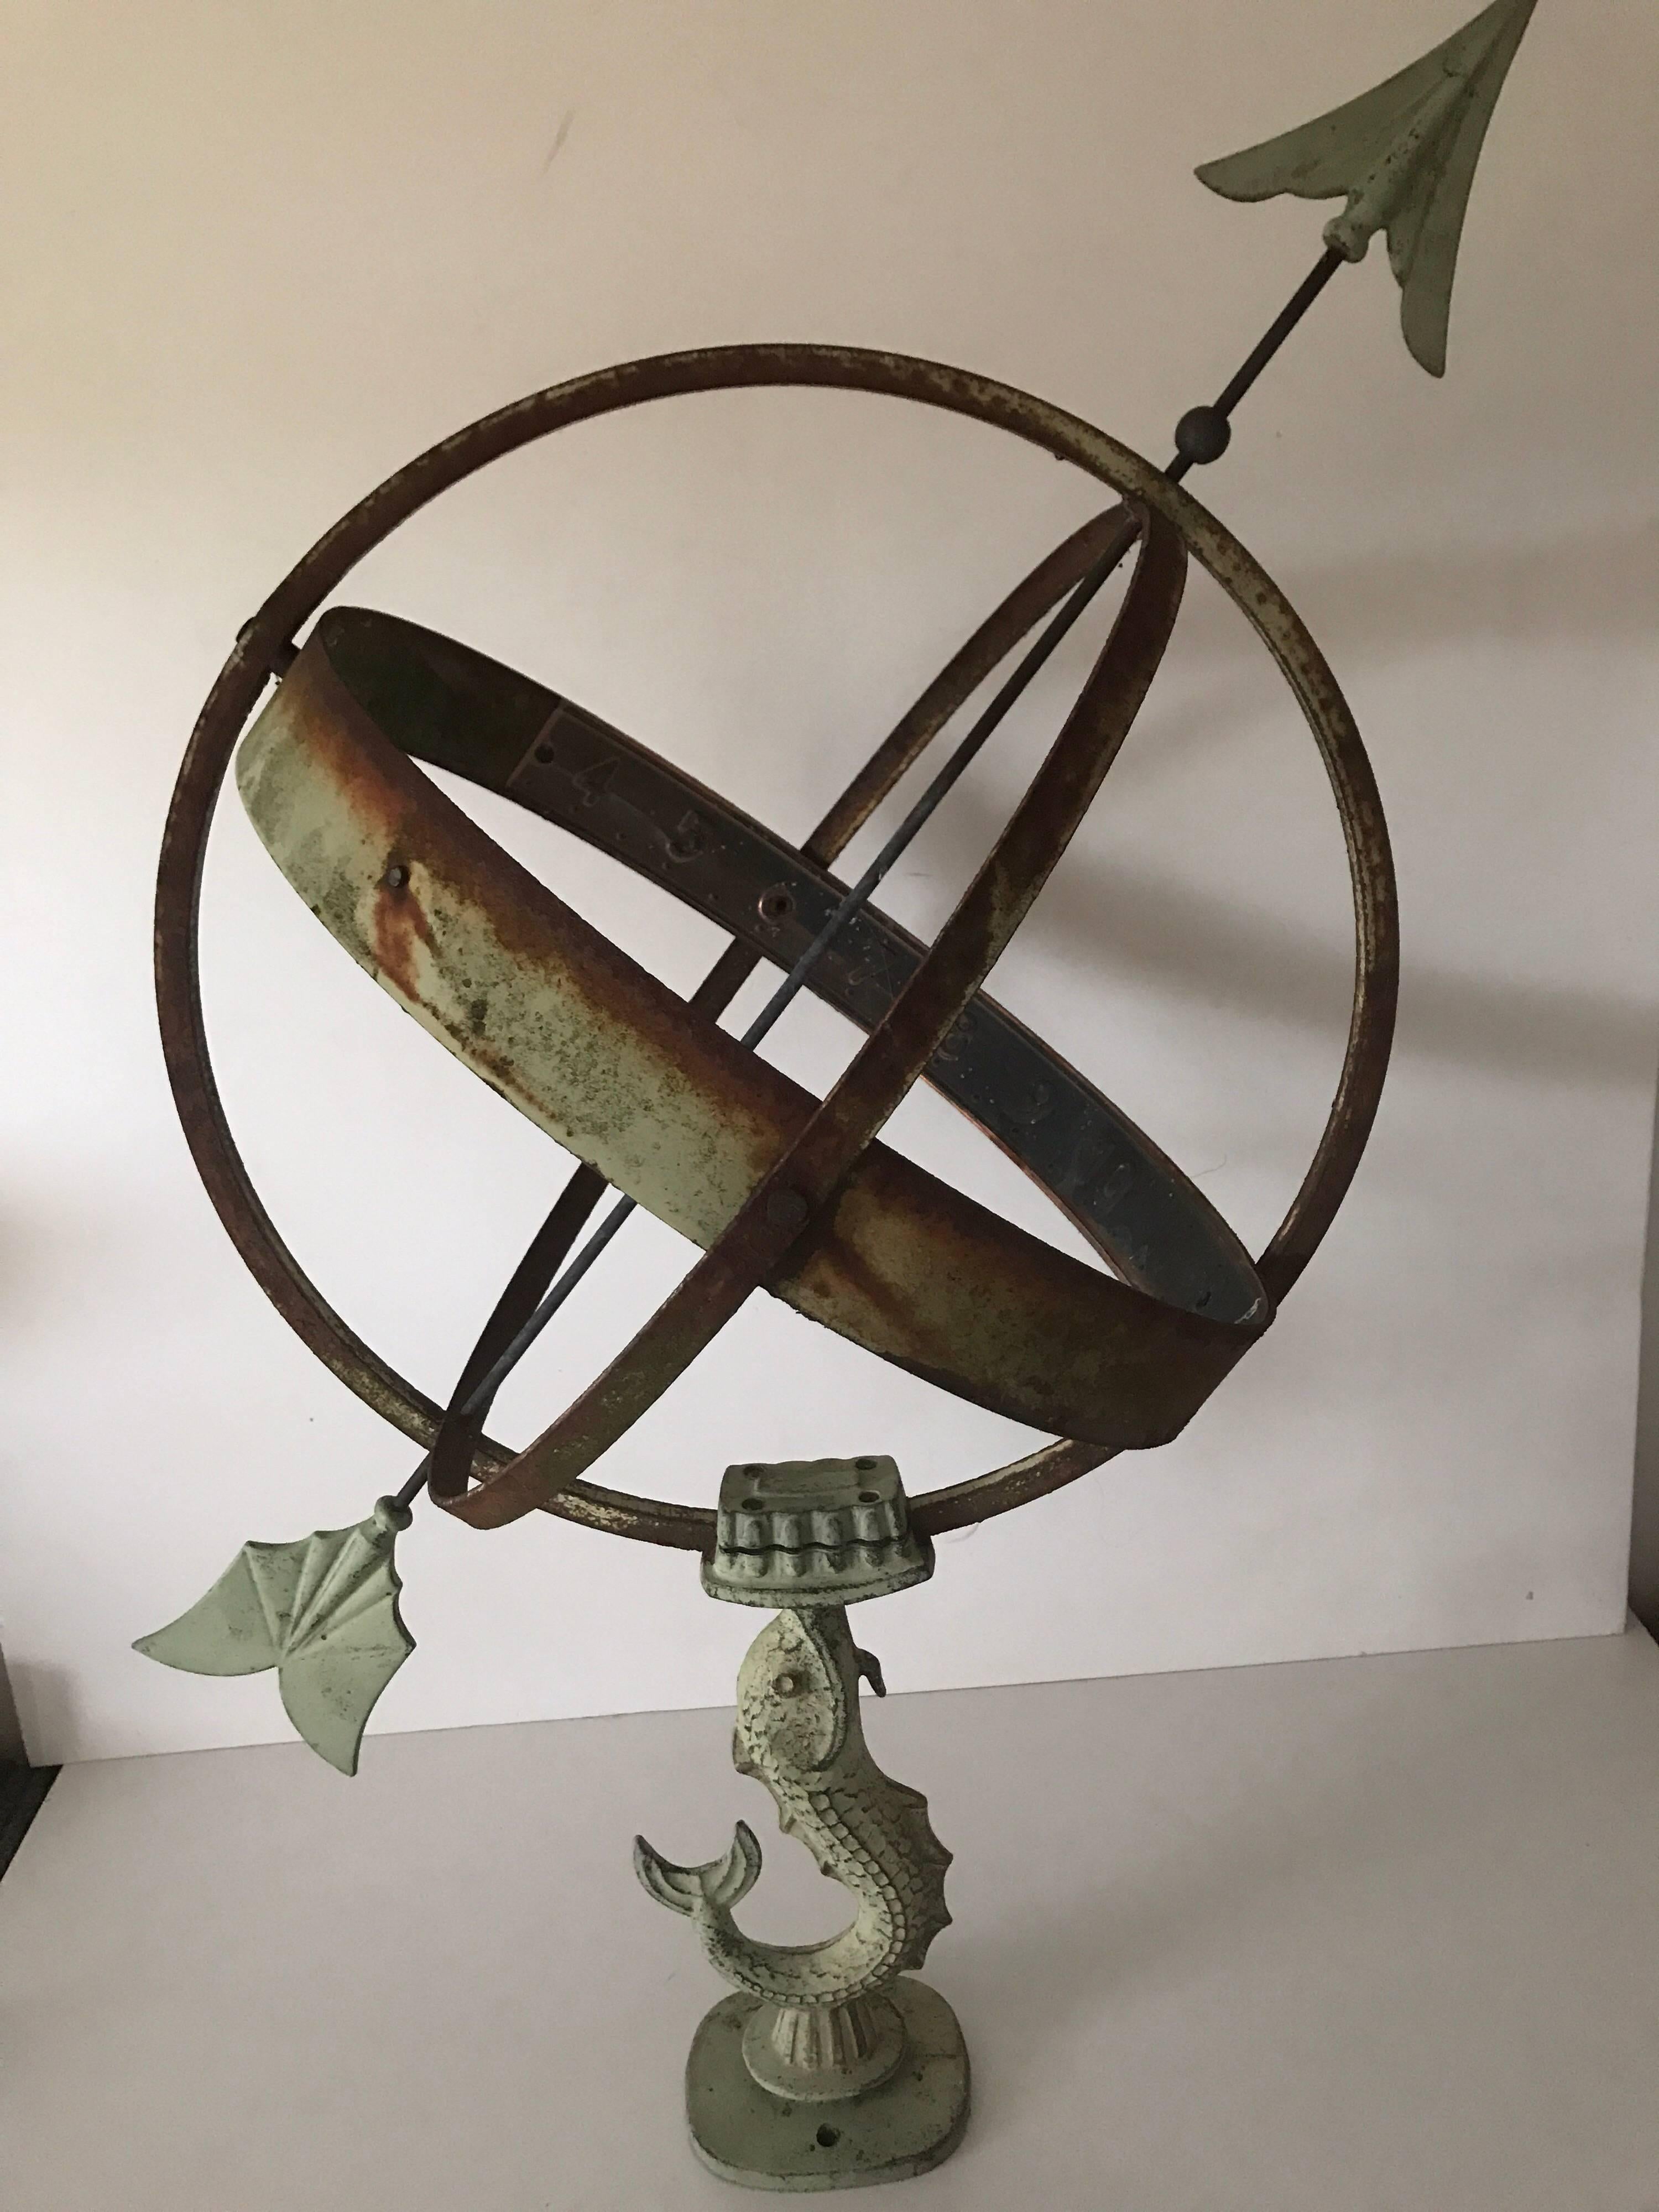 Large Swedish mid-20th century wrought iron and copper garden sundial.
A rare and beautiful garden sundial made of wrought iron and copper. The fish that holds the sundial is made of metal patinated to look like oxidized copper. There is a marking